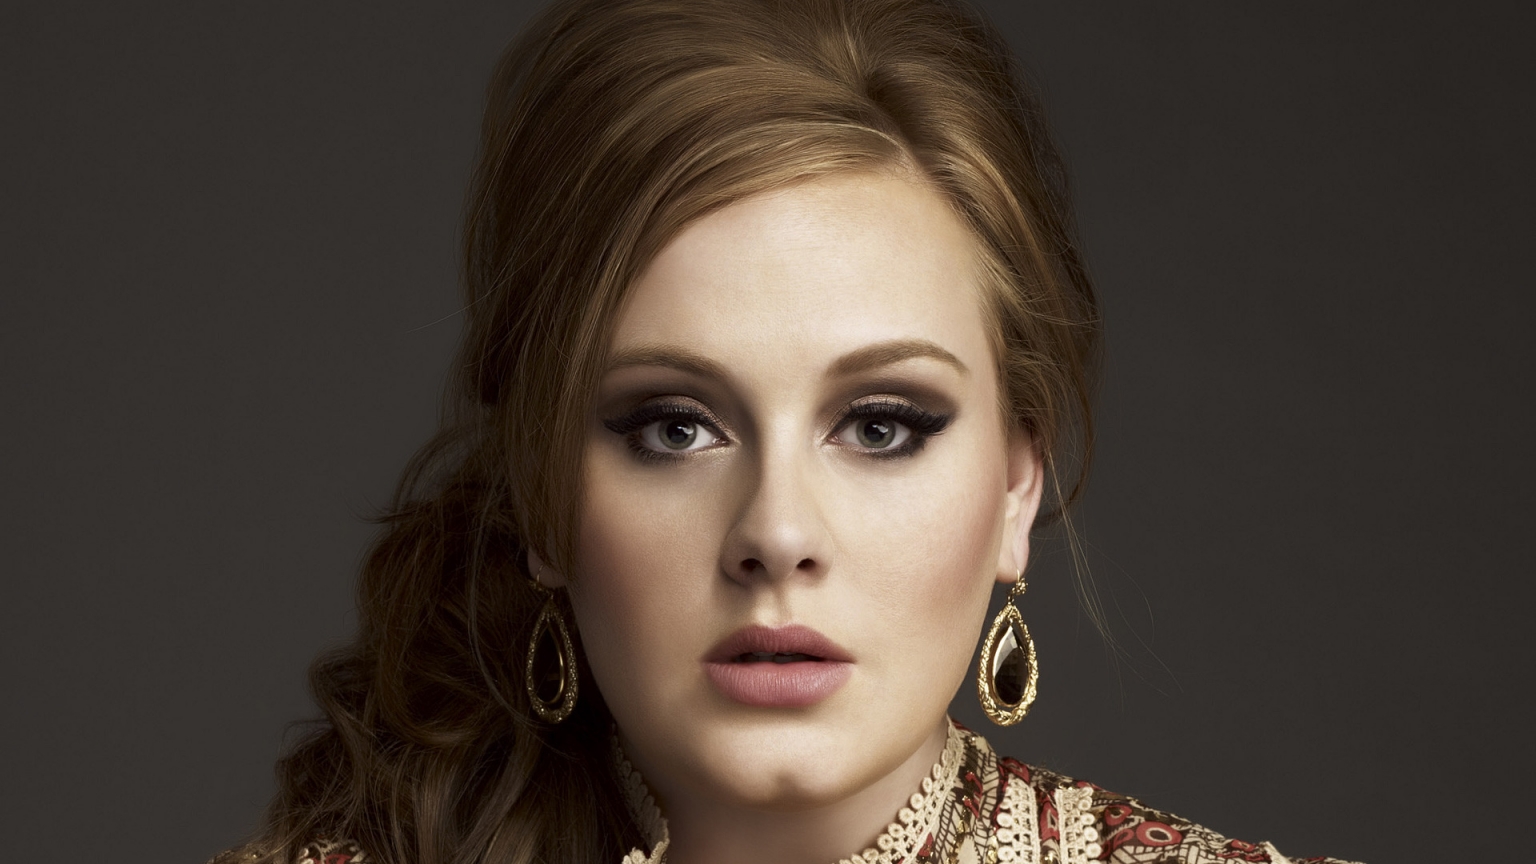 Adele Laurie Blue Adkins for 1536 x 864 HDTV resolution